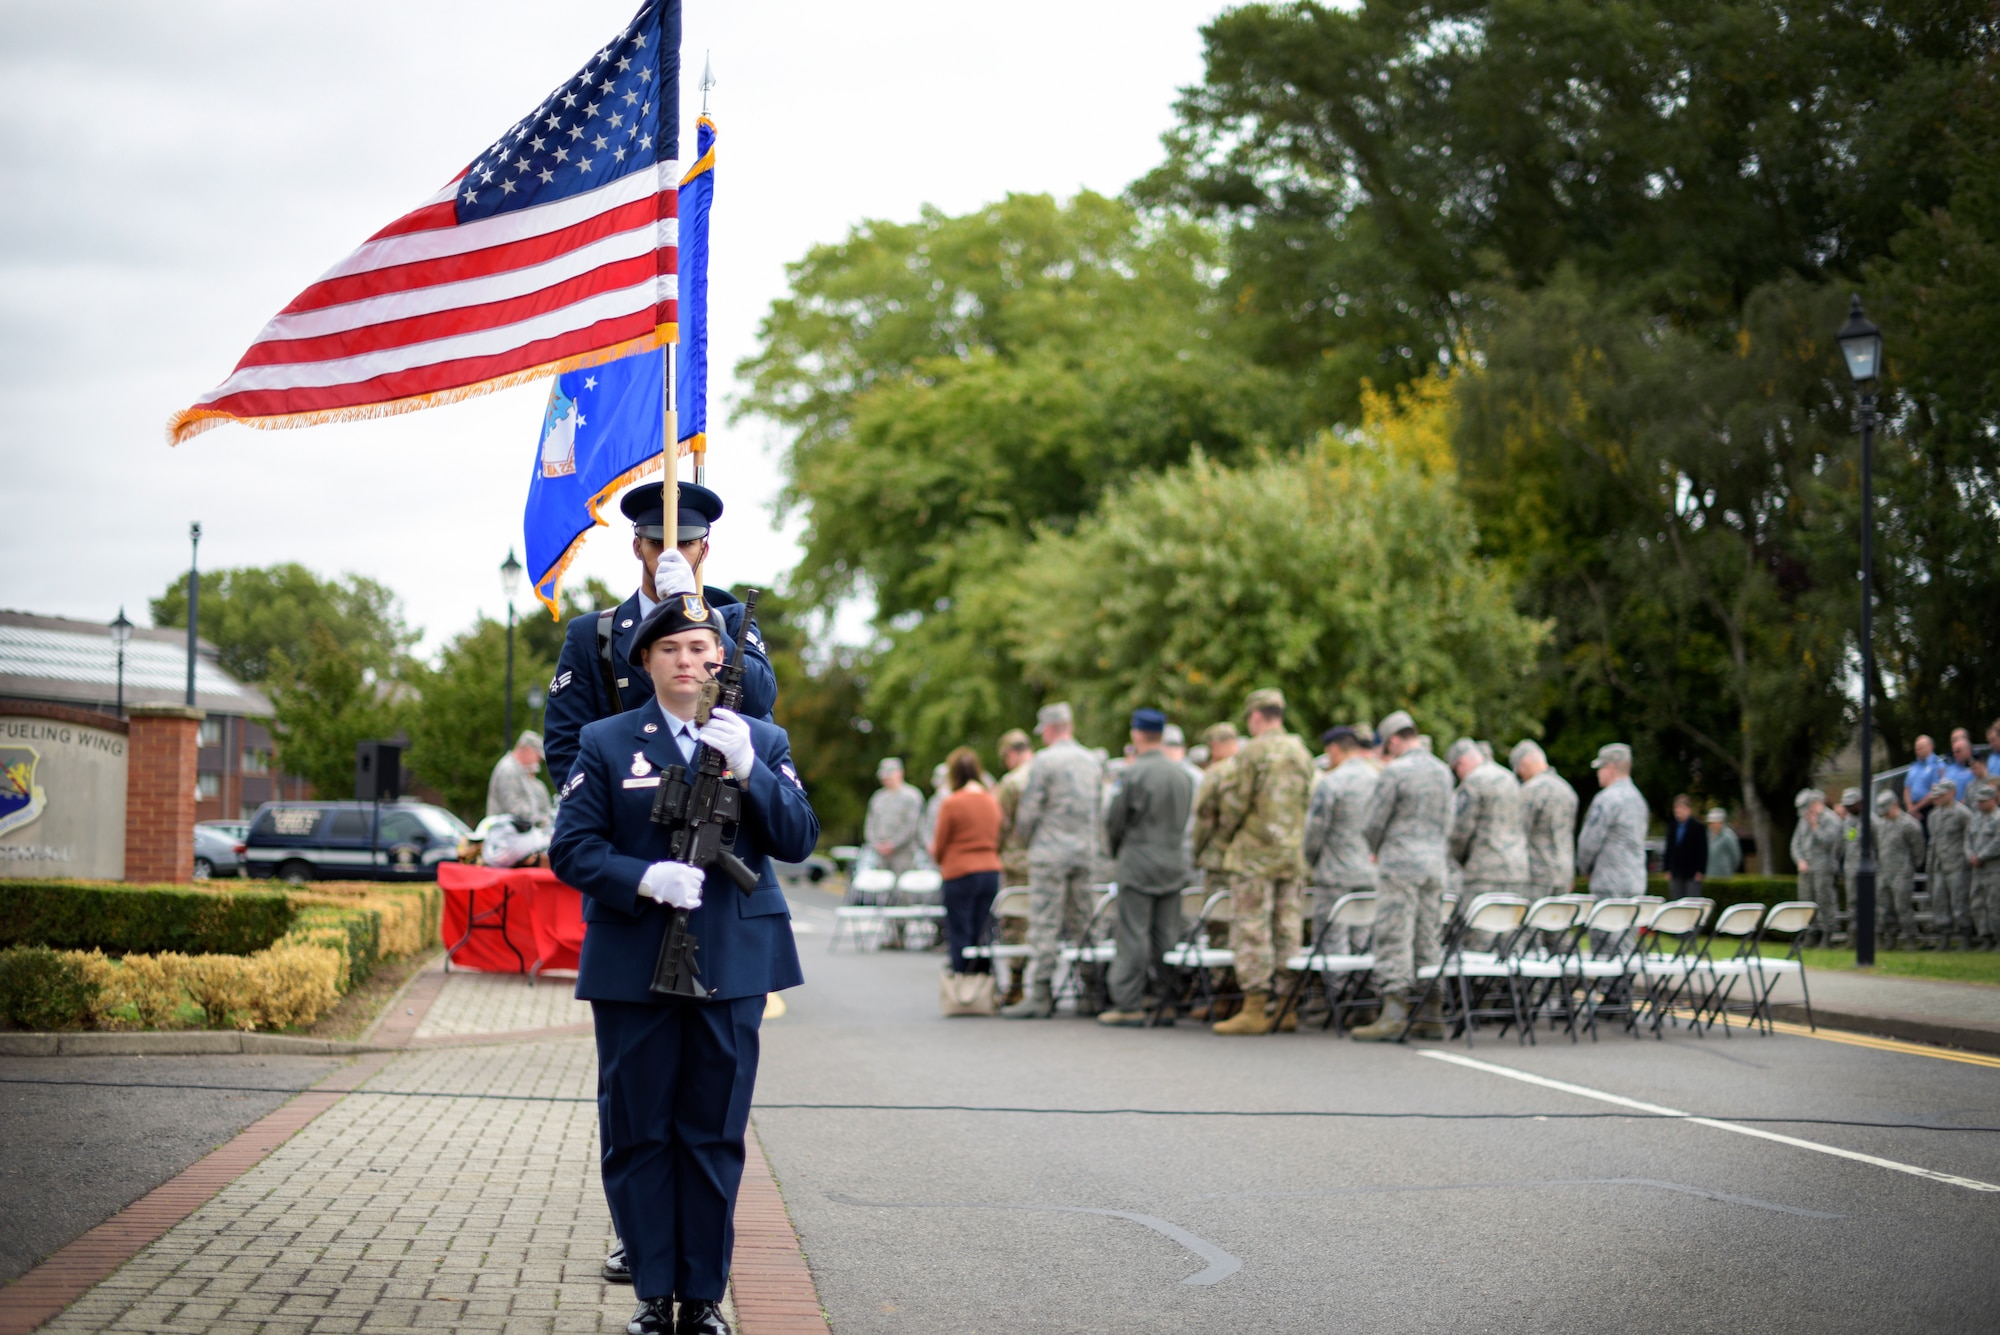 Members of the color guard march off after posting the colors, marking the beginning of a 9/11 ceremony at RAF Mildenhall Sept. 11, 2018. Team Mildenhall and the Liberty Wing leadership, Airmen and civilians formed the audience for the ceremony of remembrance (U.S. Air Force photo by Tech. Sgt. Emerson Nuñez)